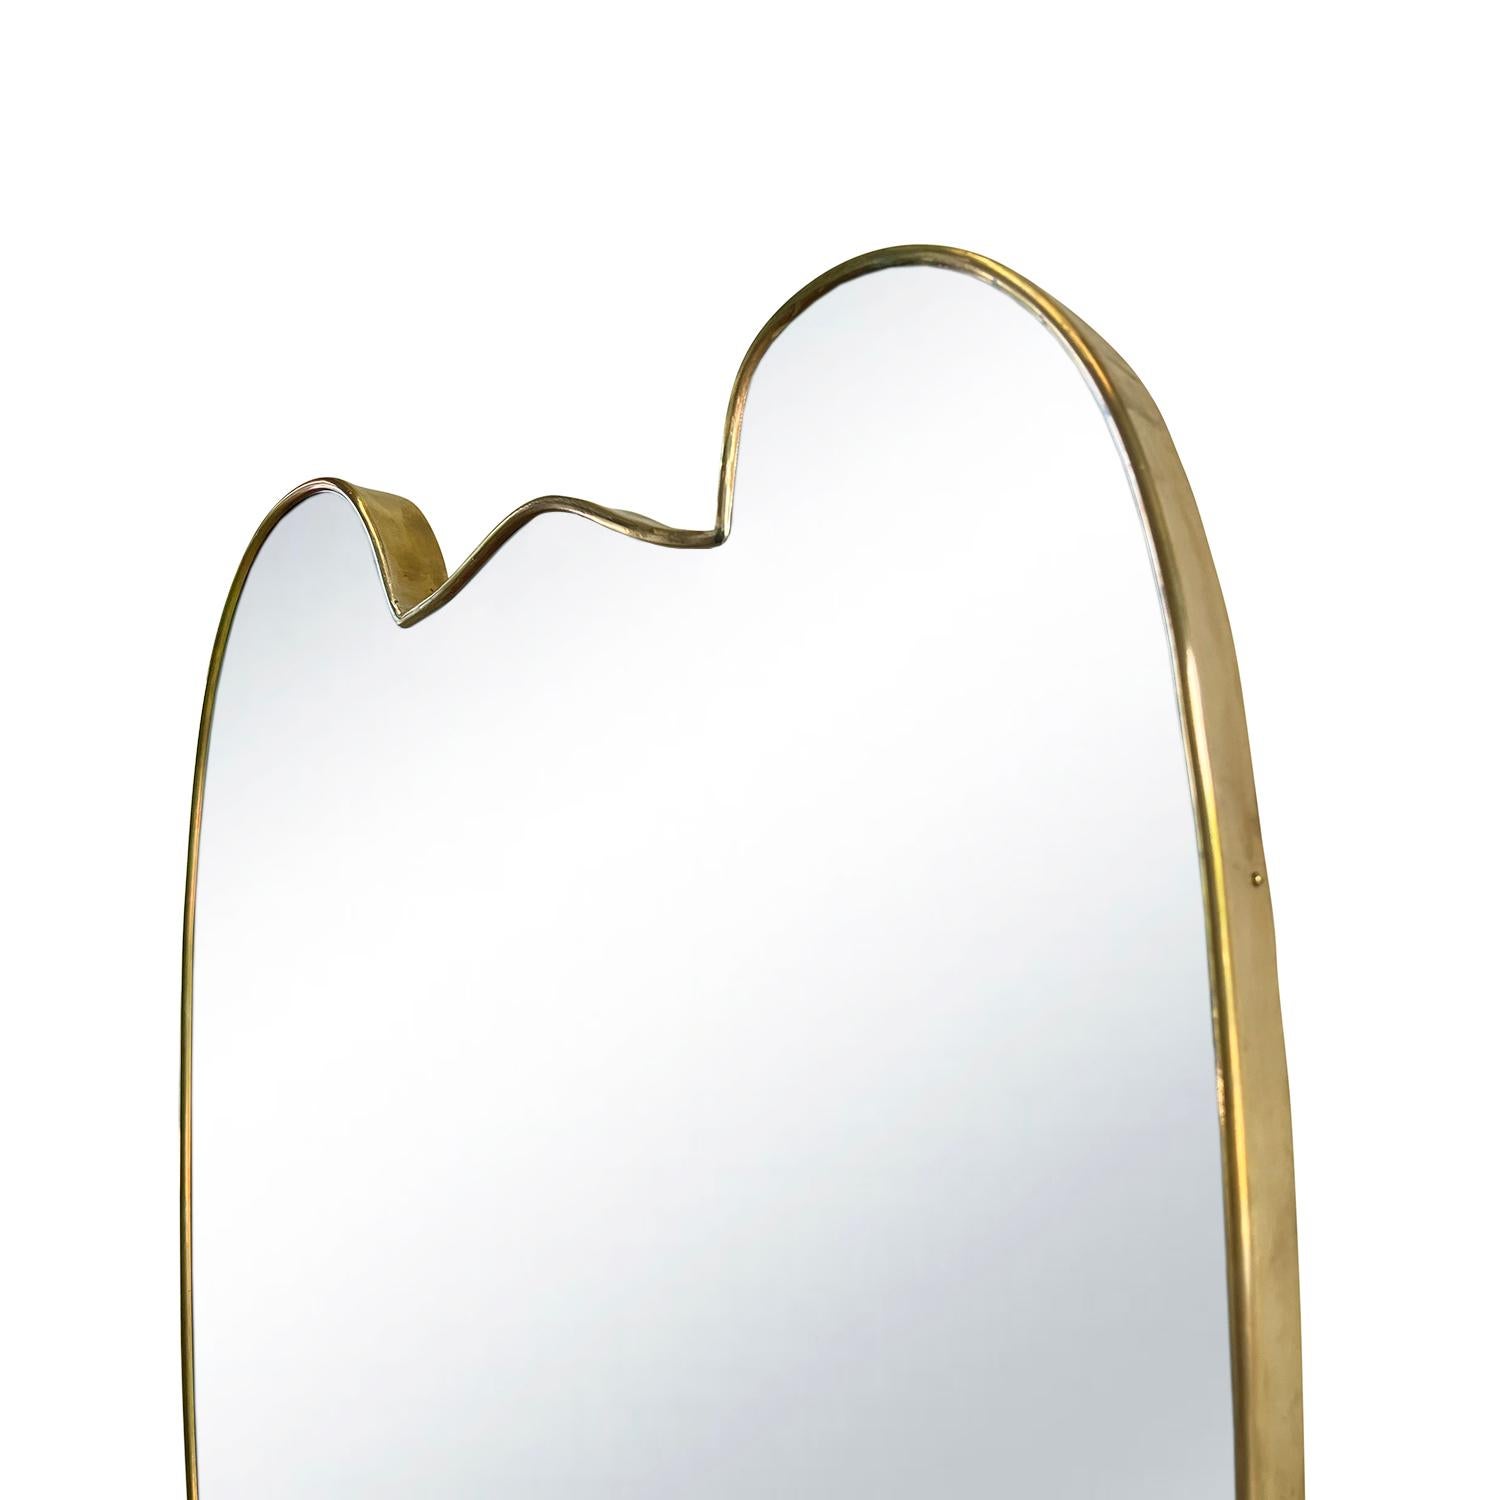 20th Century Italian Mid-Century Modernist Vintage Oval Brass Wall Glass Mirror In Good Condition For Sale In West Palm Beach, FL